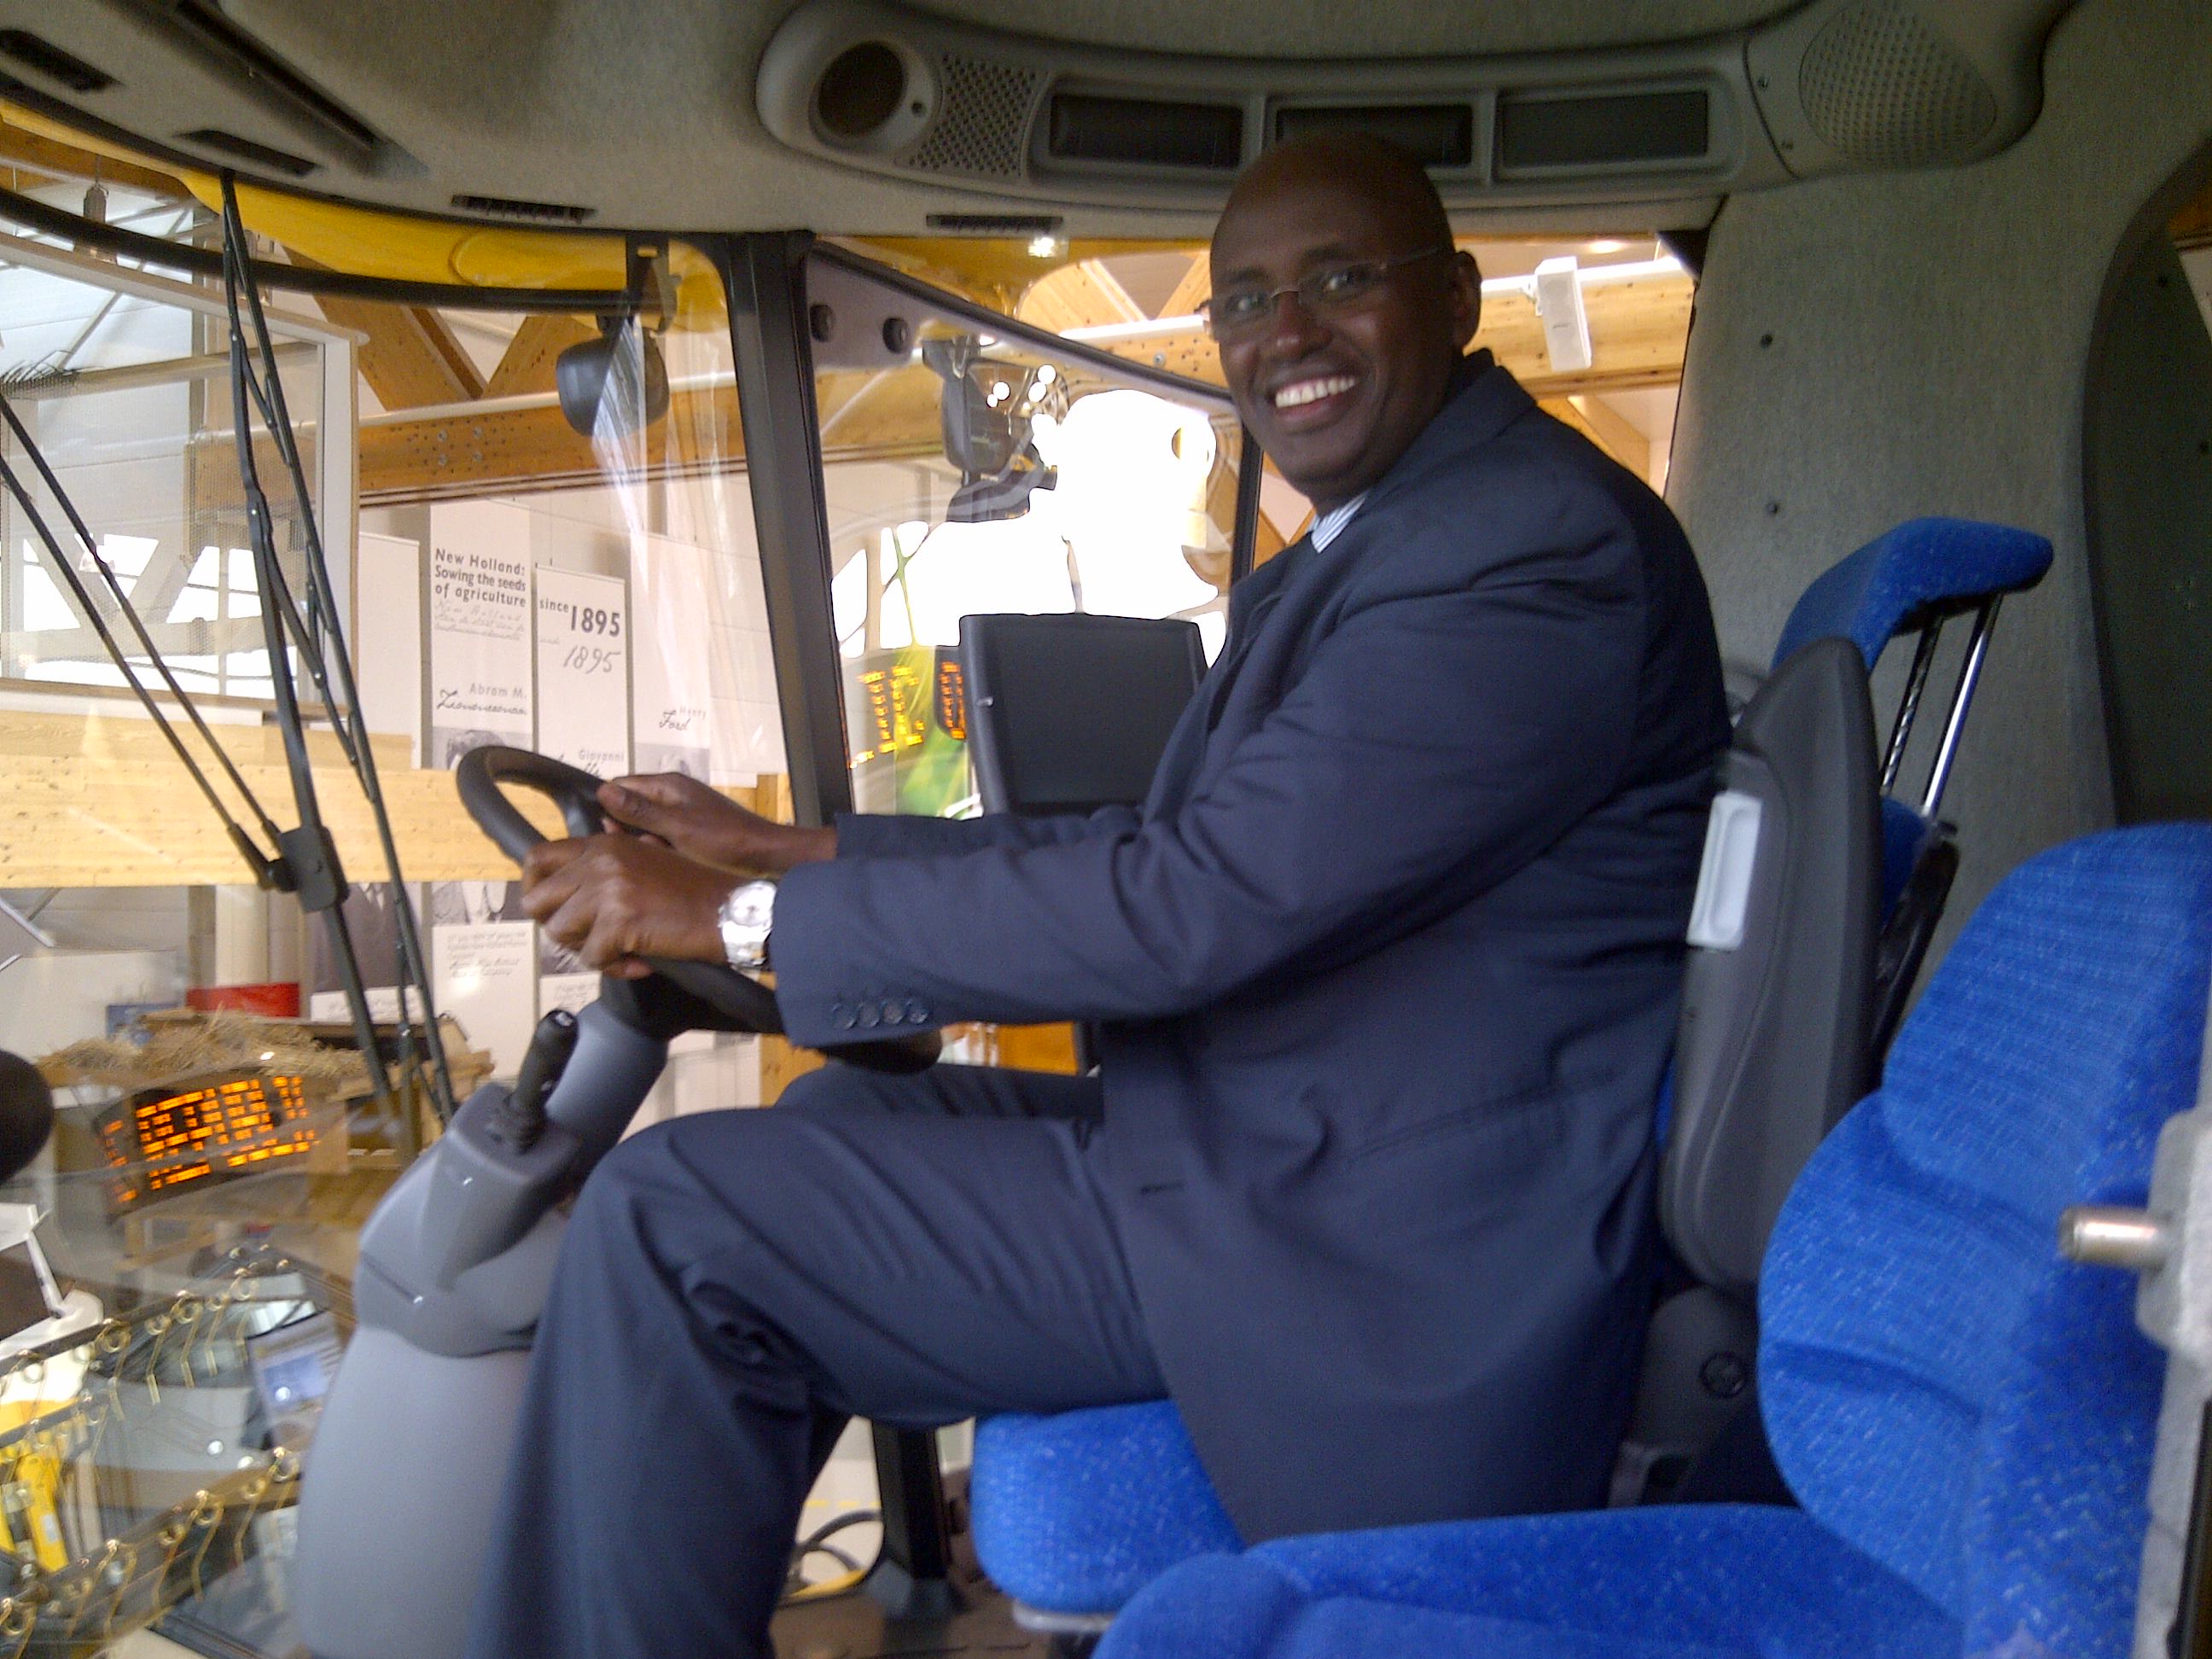 NEW HOLLAND WELCOMES UGANDA MINISTER OF STATE FOR AGRICULTURE AT ITS ZEDELGEM HARVESTING CENTRE OF EXCELLENCE